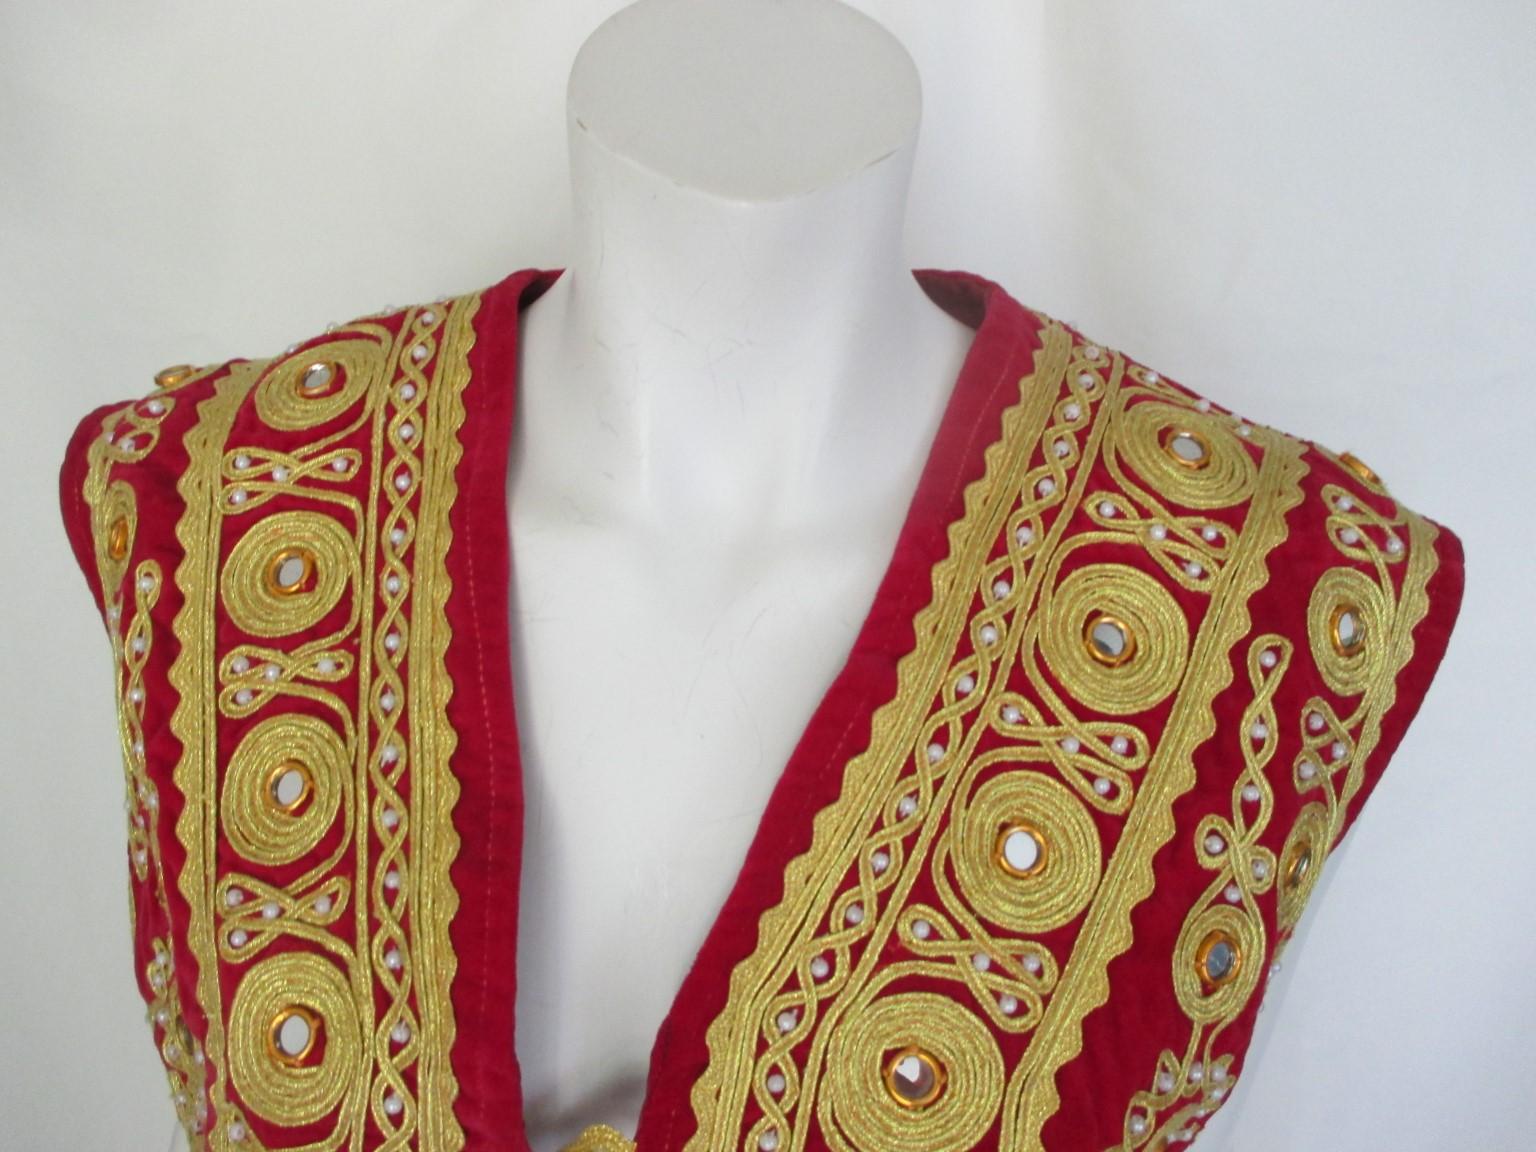 This is an unique antique ottoman vest, decorated with elaborate gold threads.

We offer more exclusive vintage items, view our frontstore.

Details:
Color and material: red velvet , gold embroidery with round mirrors
fully lined
3 buttons
2